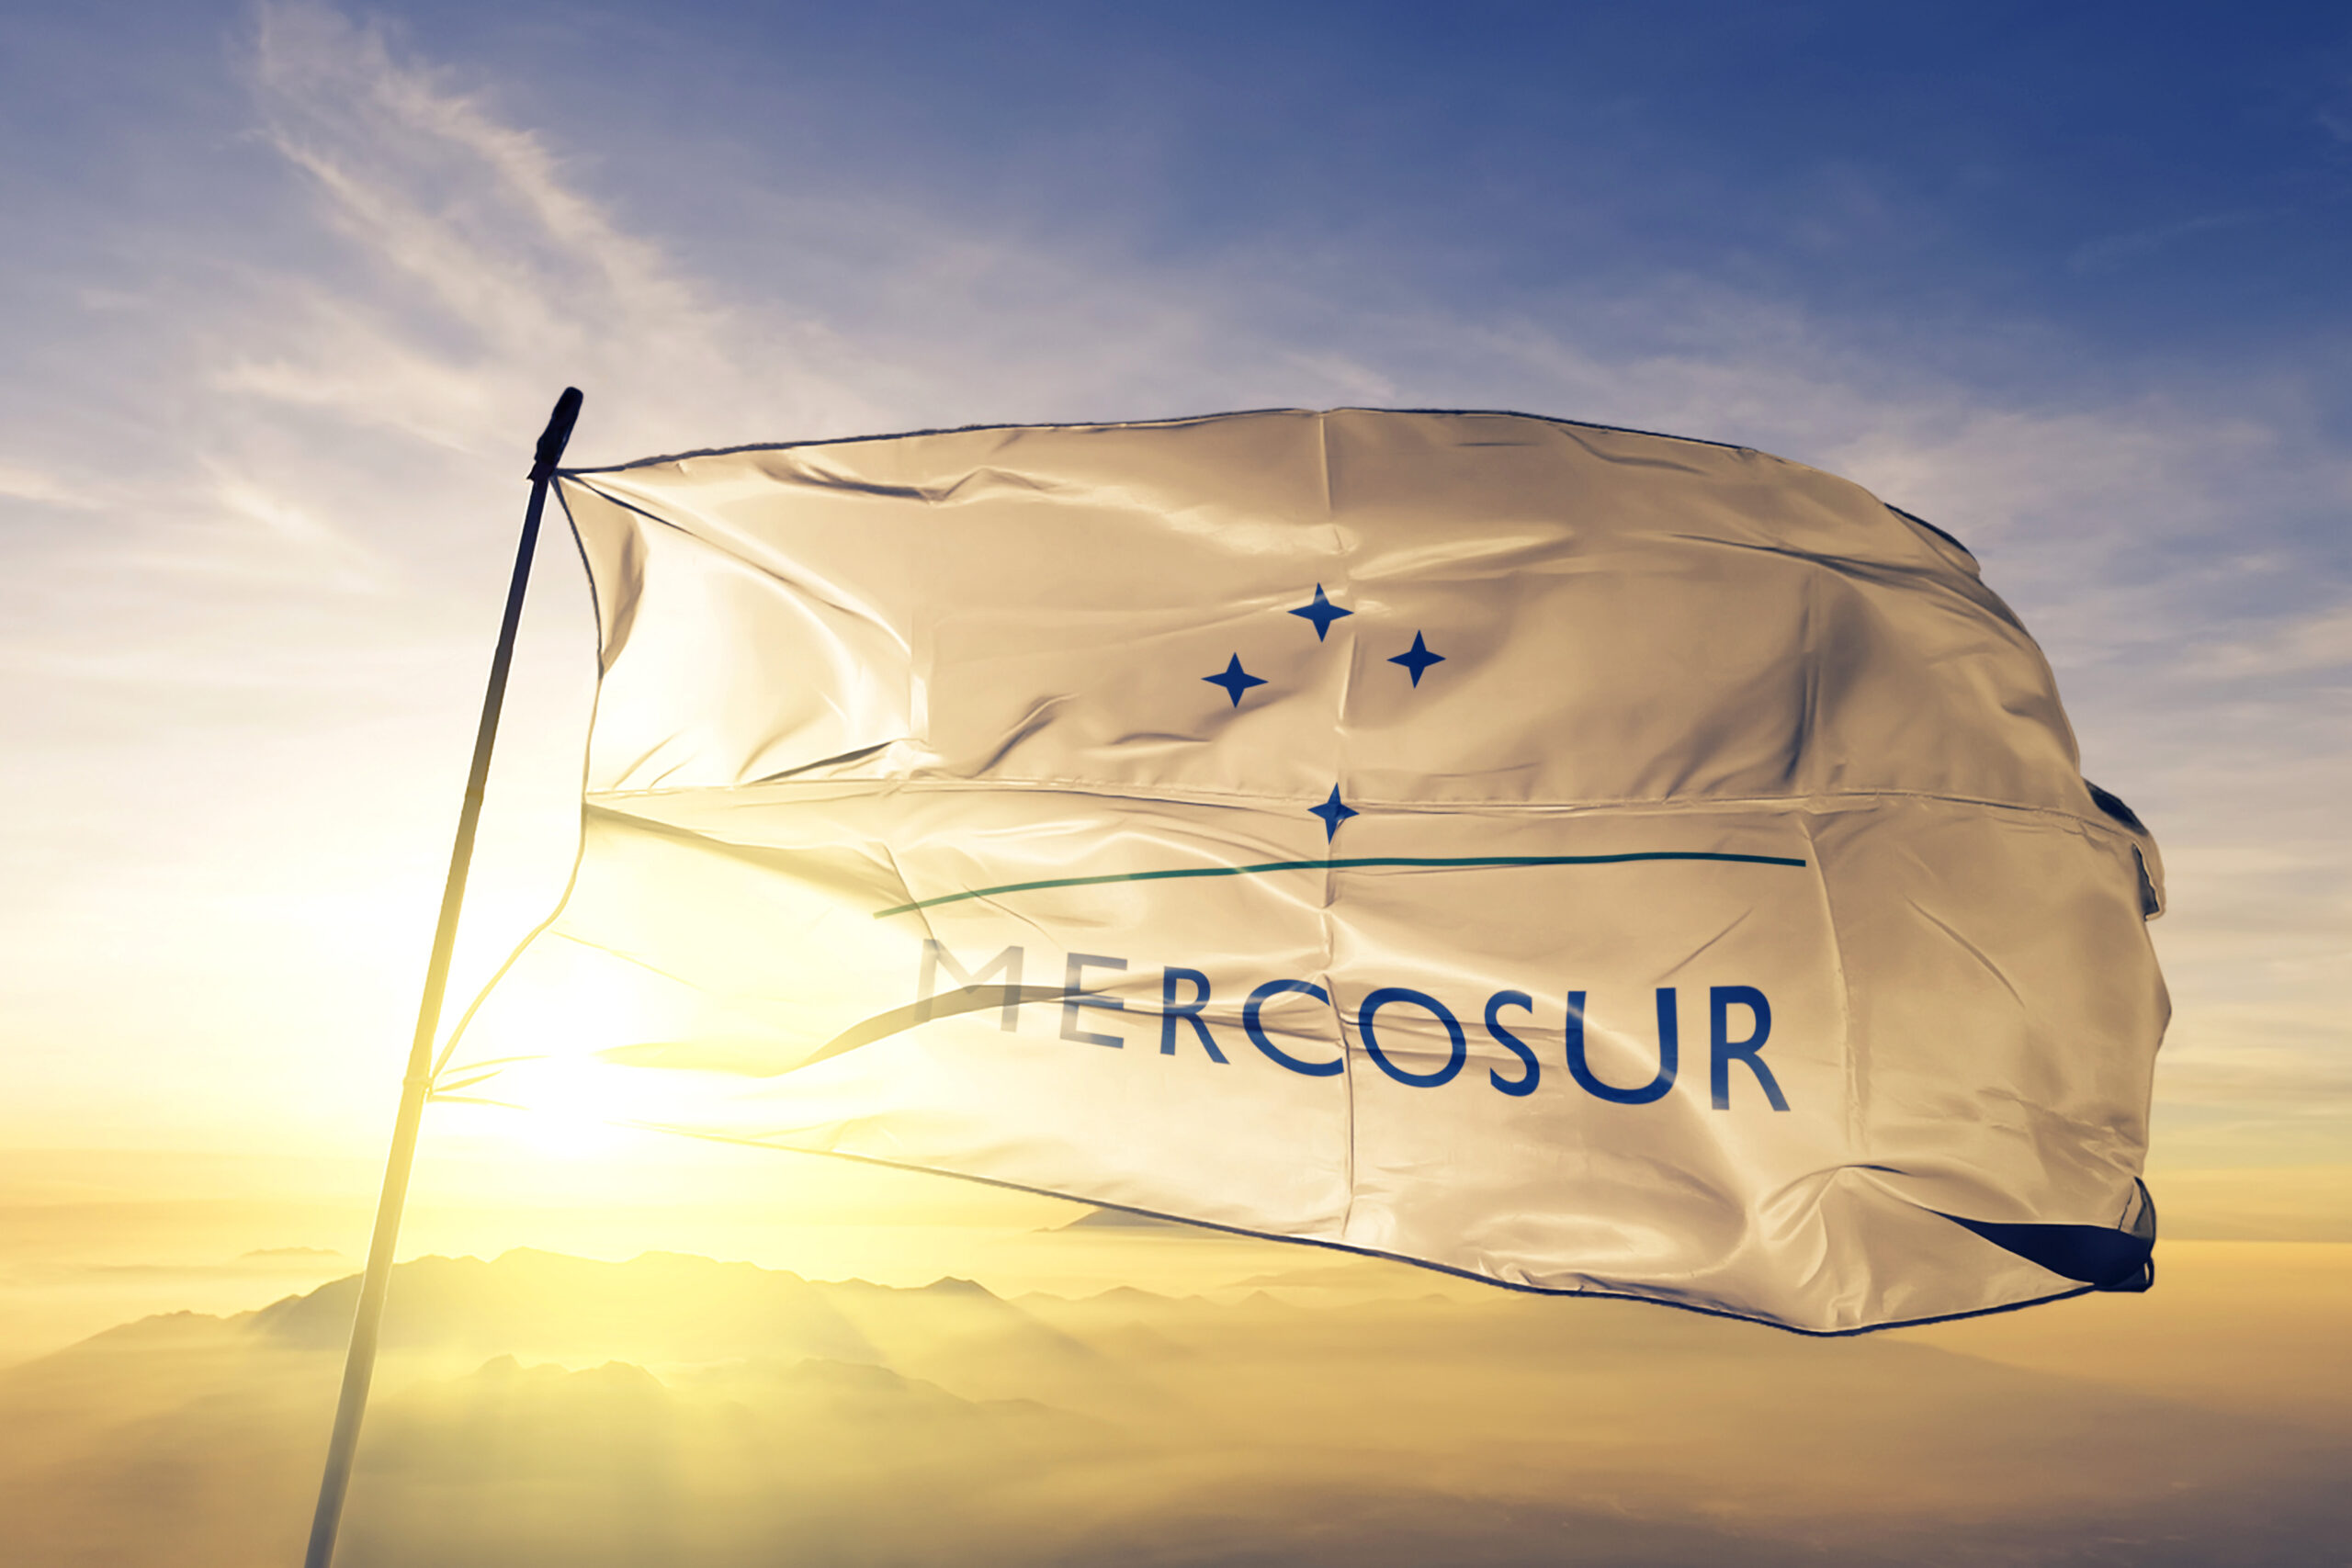 Cementing neo-colonial relations: the EU – Mercosur ‘free’ trade deal